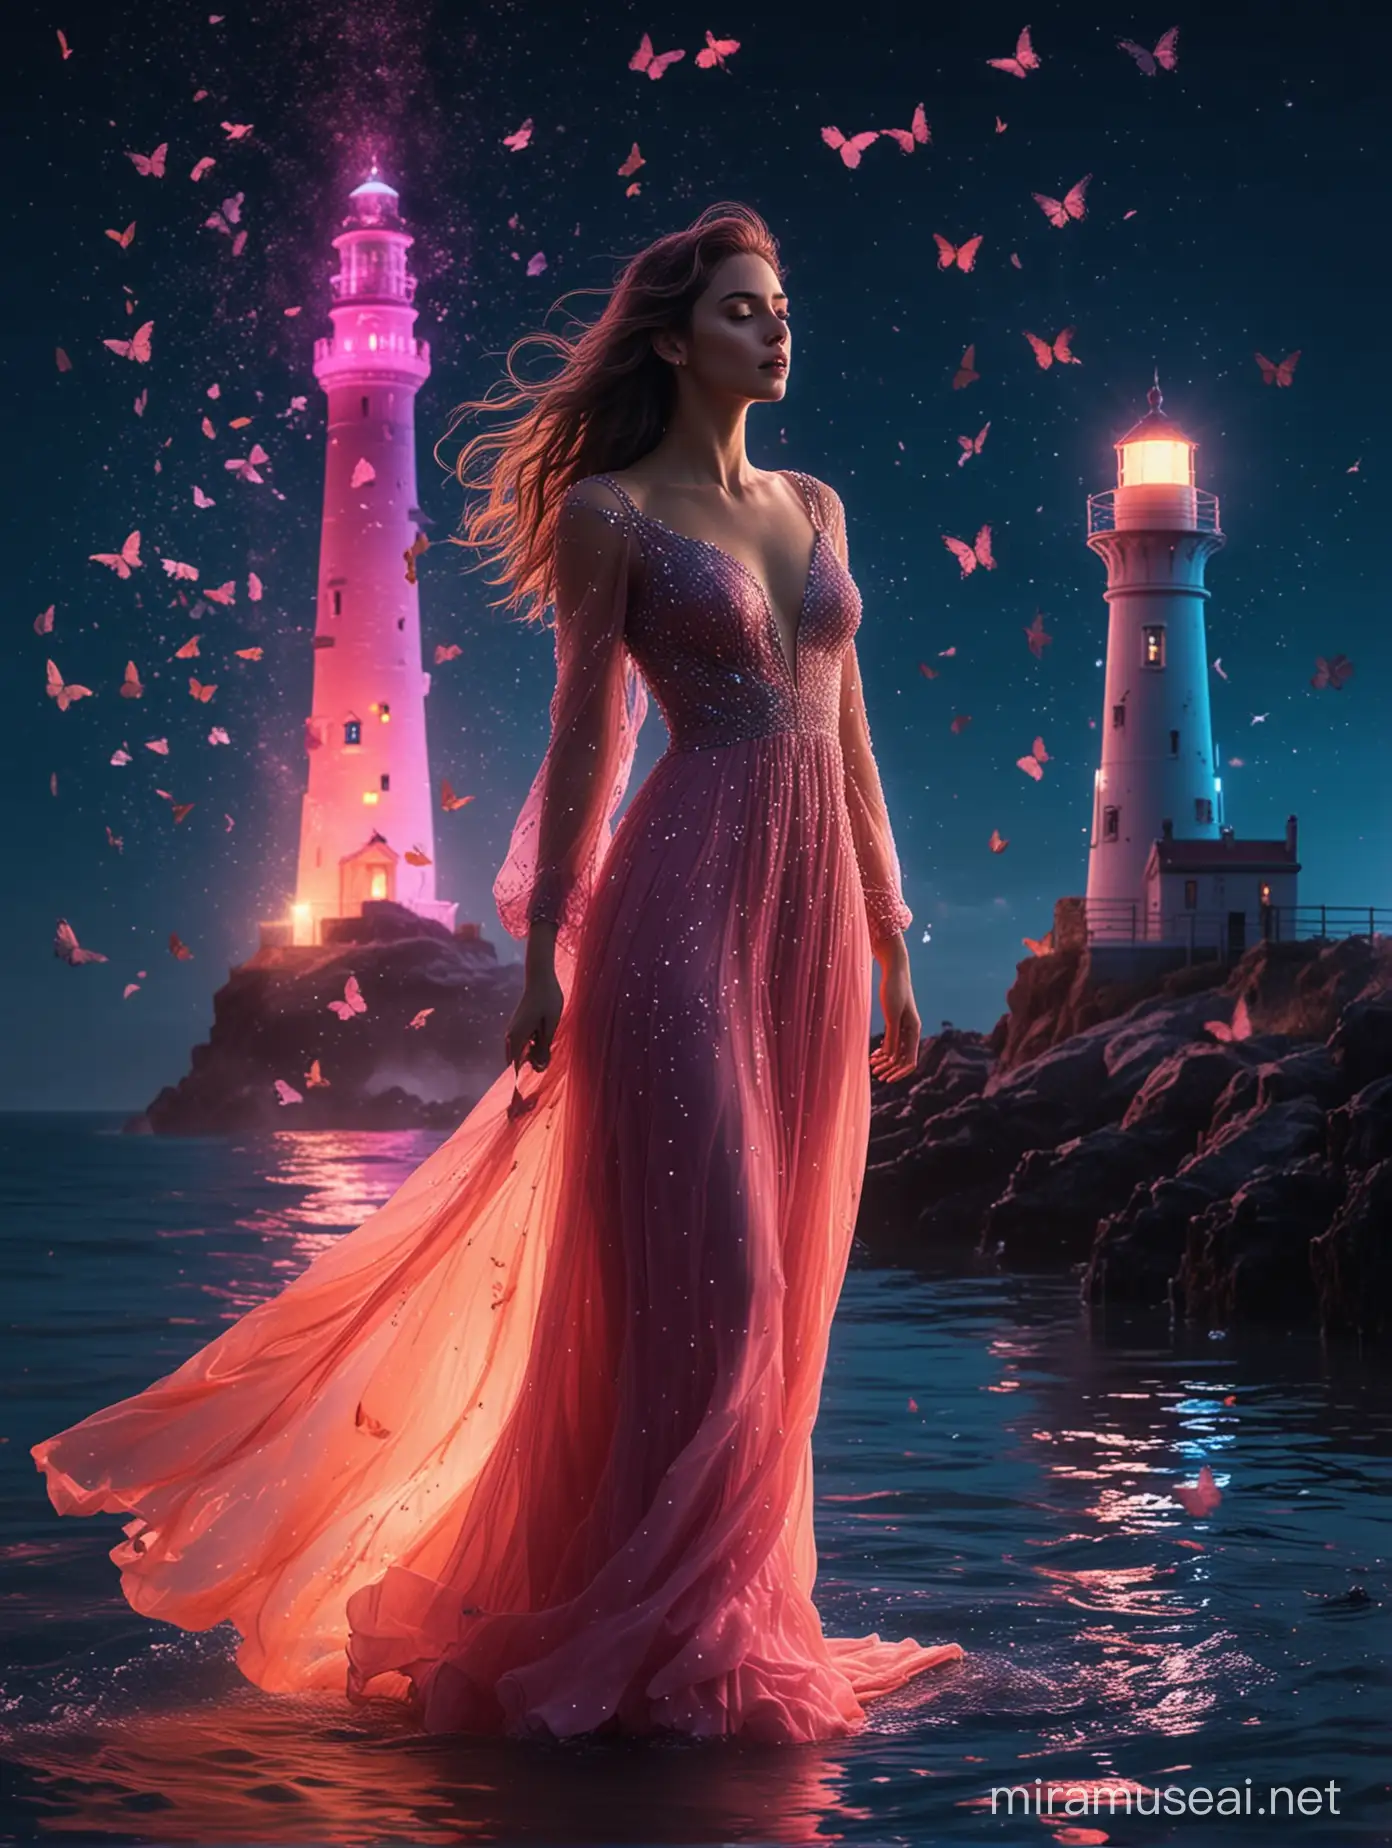 Elegant Woman in NeonLit Waters Transforming into Butterflies with Lighthouse Background